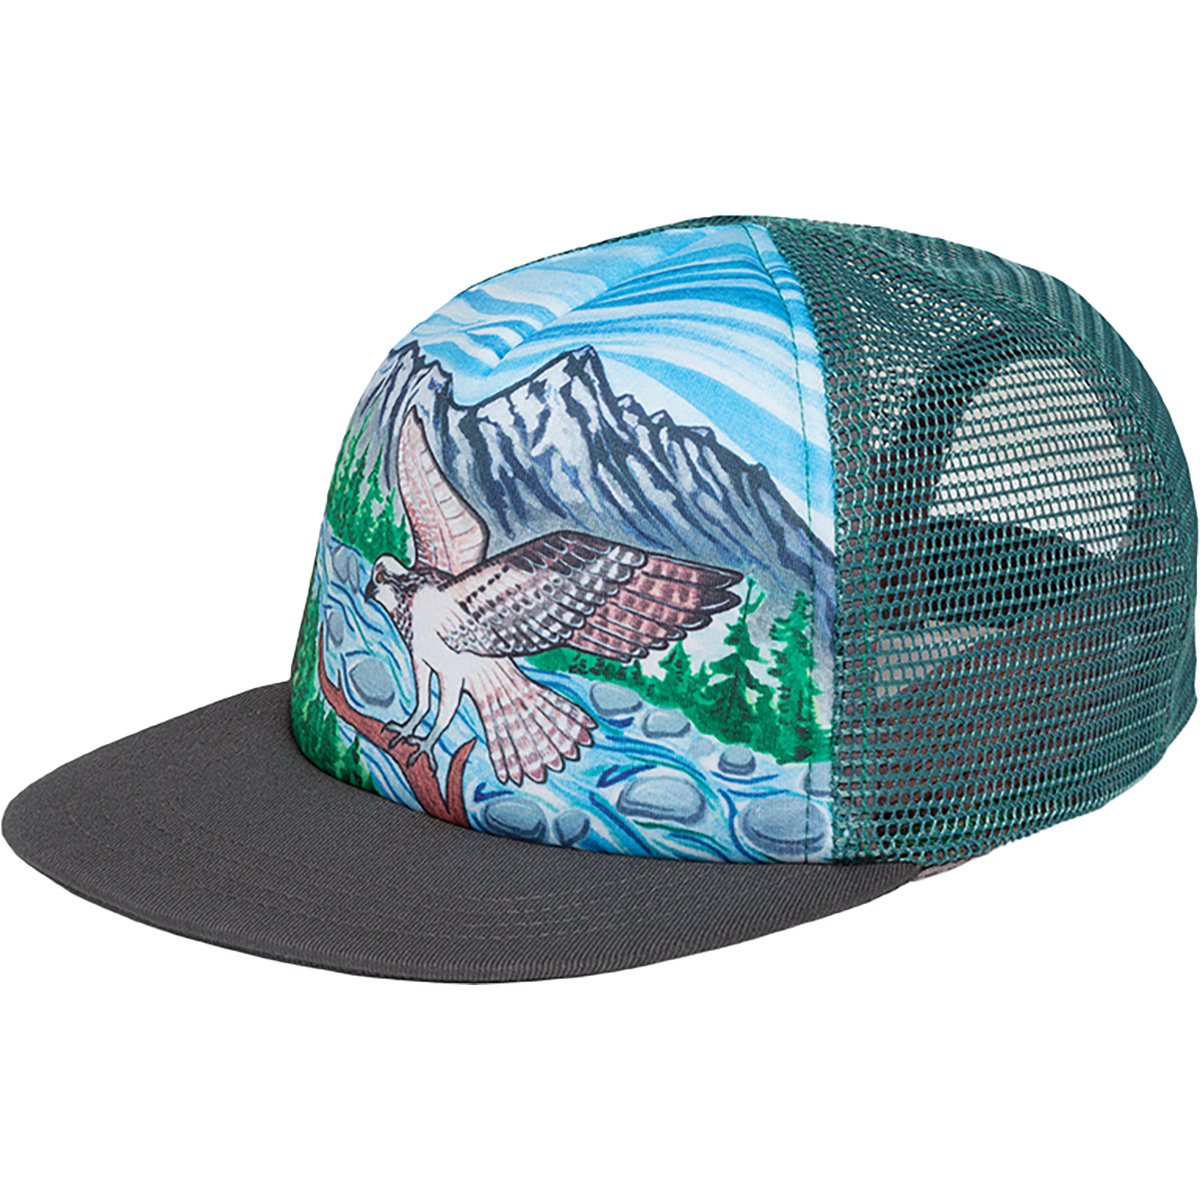 Image of Sunday Afternoons Bambino Cappellino Artist Series Trucker